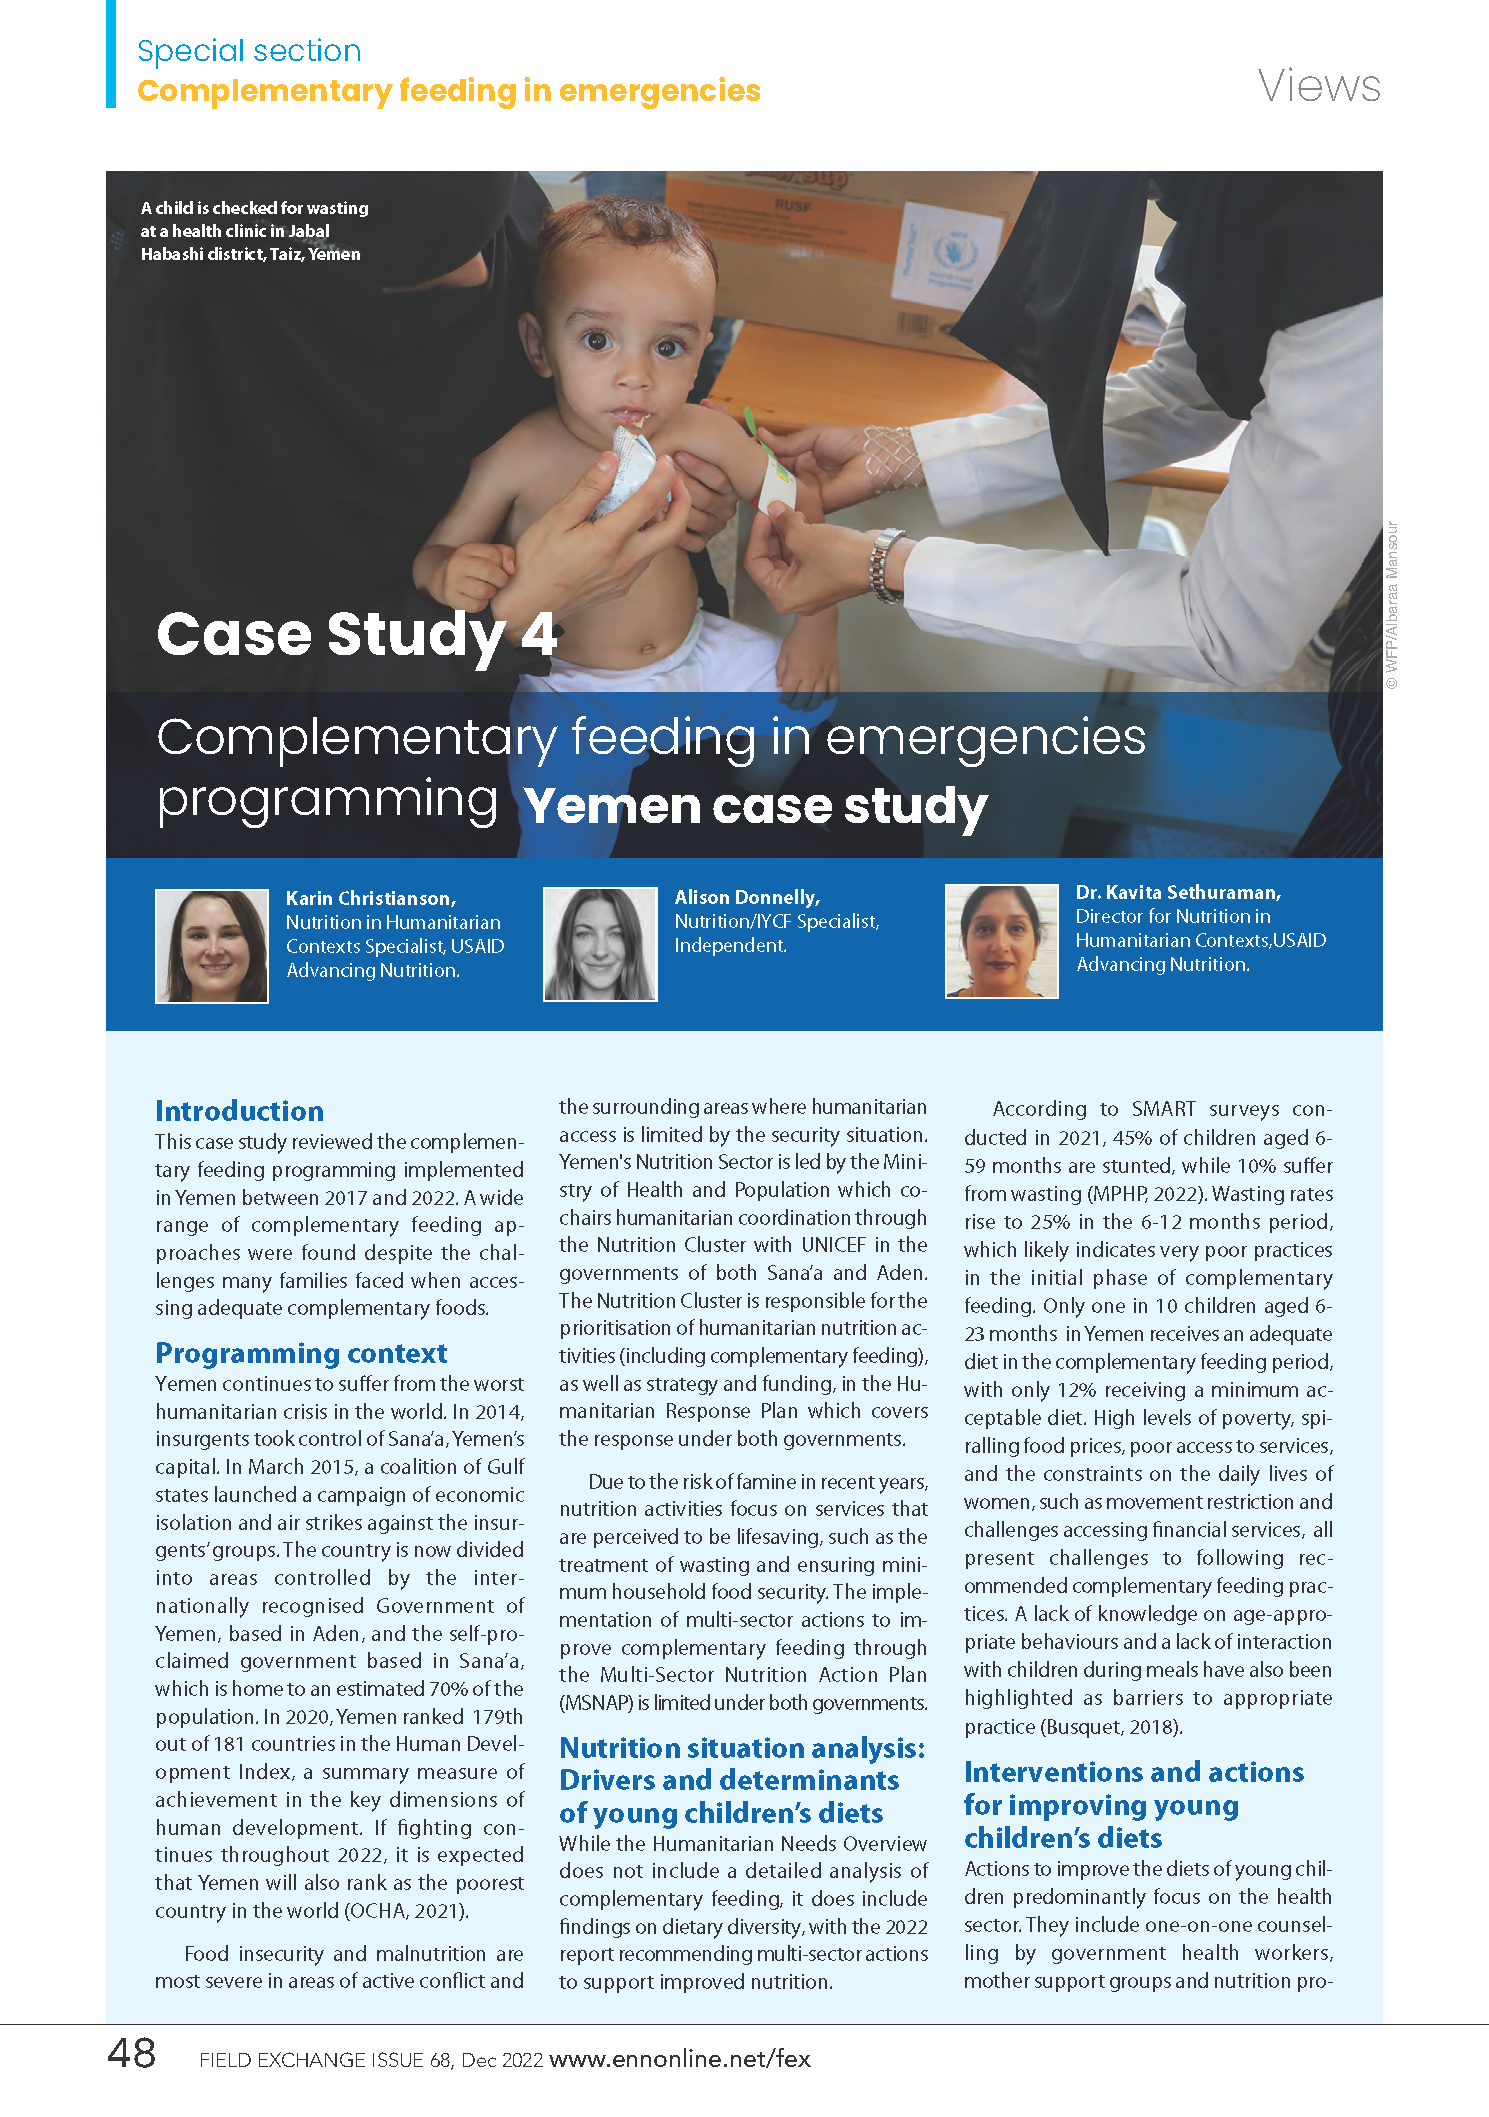 Cover page for Complementary Feeding in Emergency Programming: Yemen Case Study